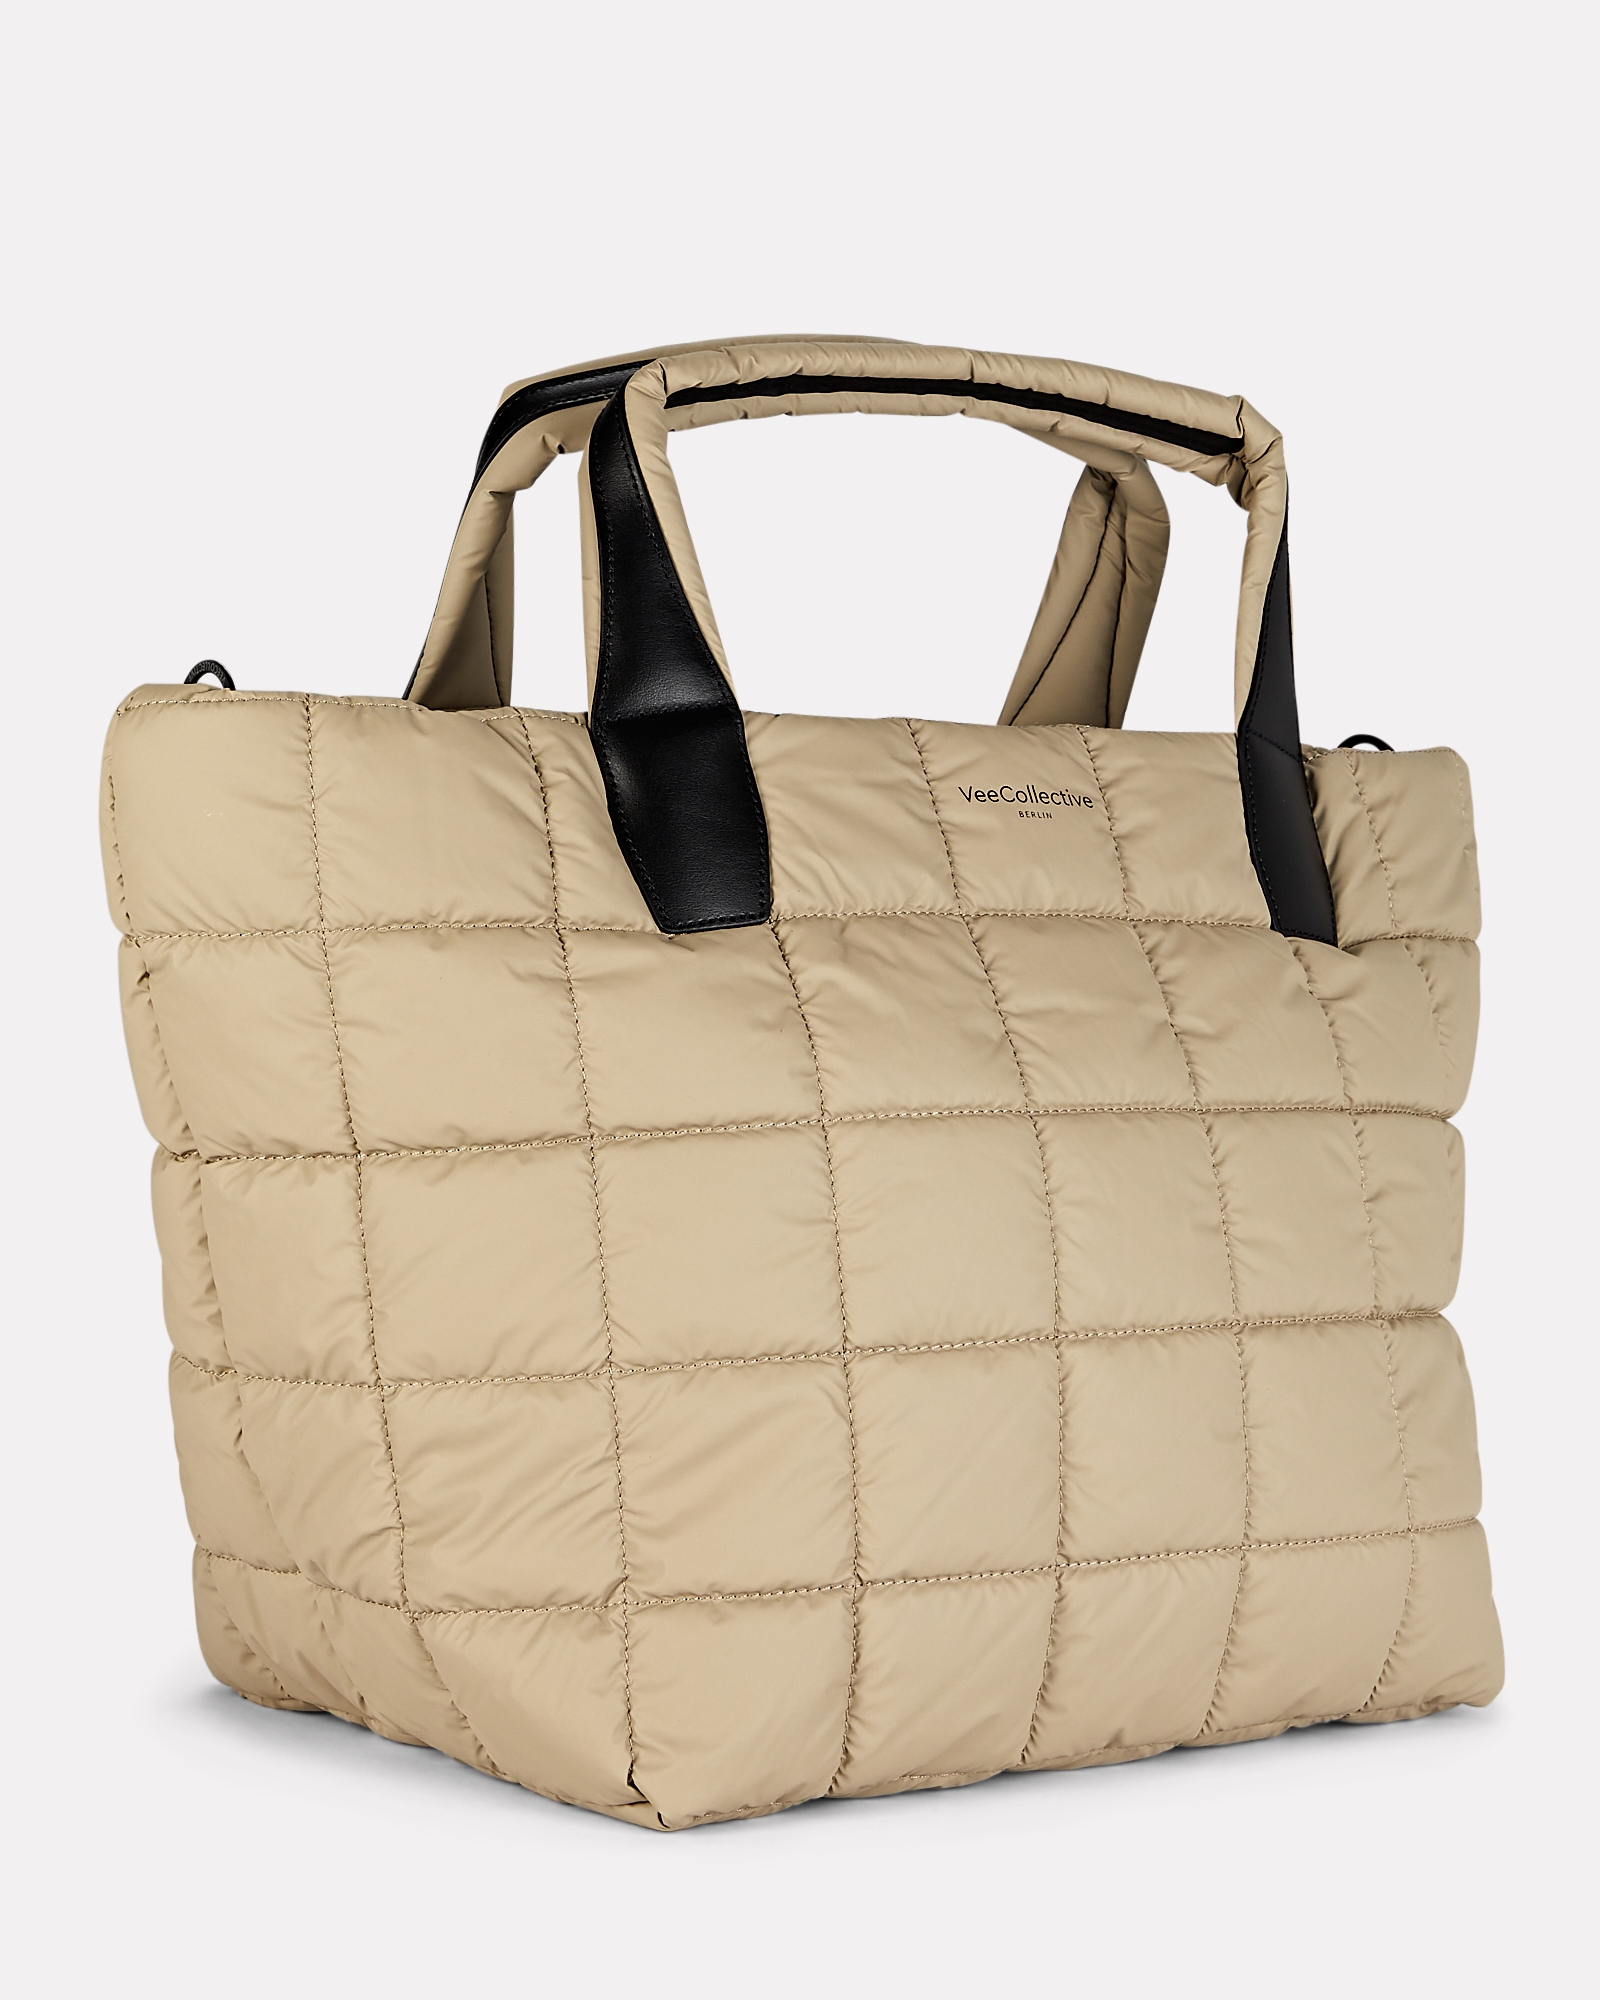 VeeCollective Porter Medium Quilted Tote Bag | INTERMIX®